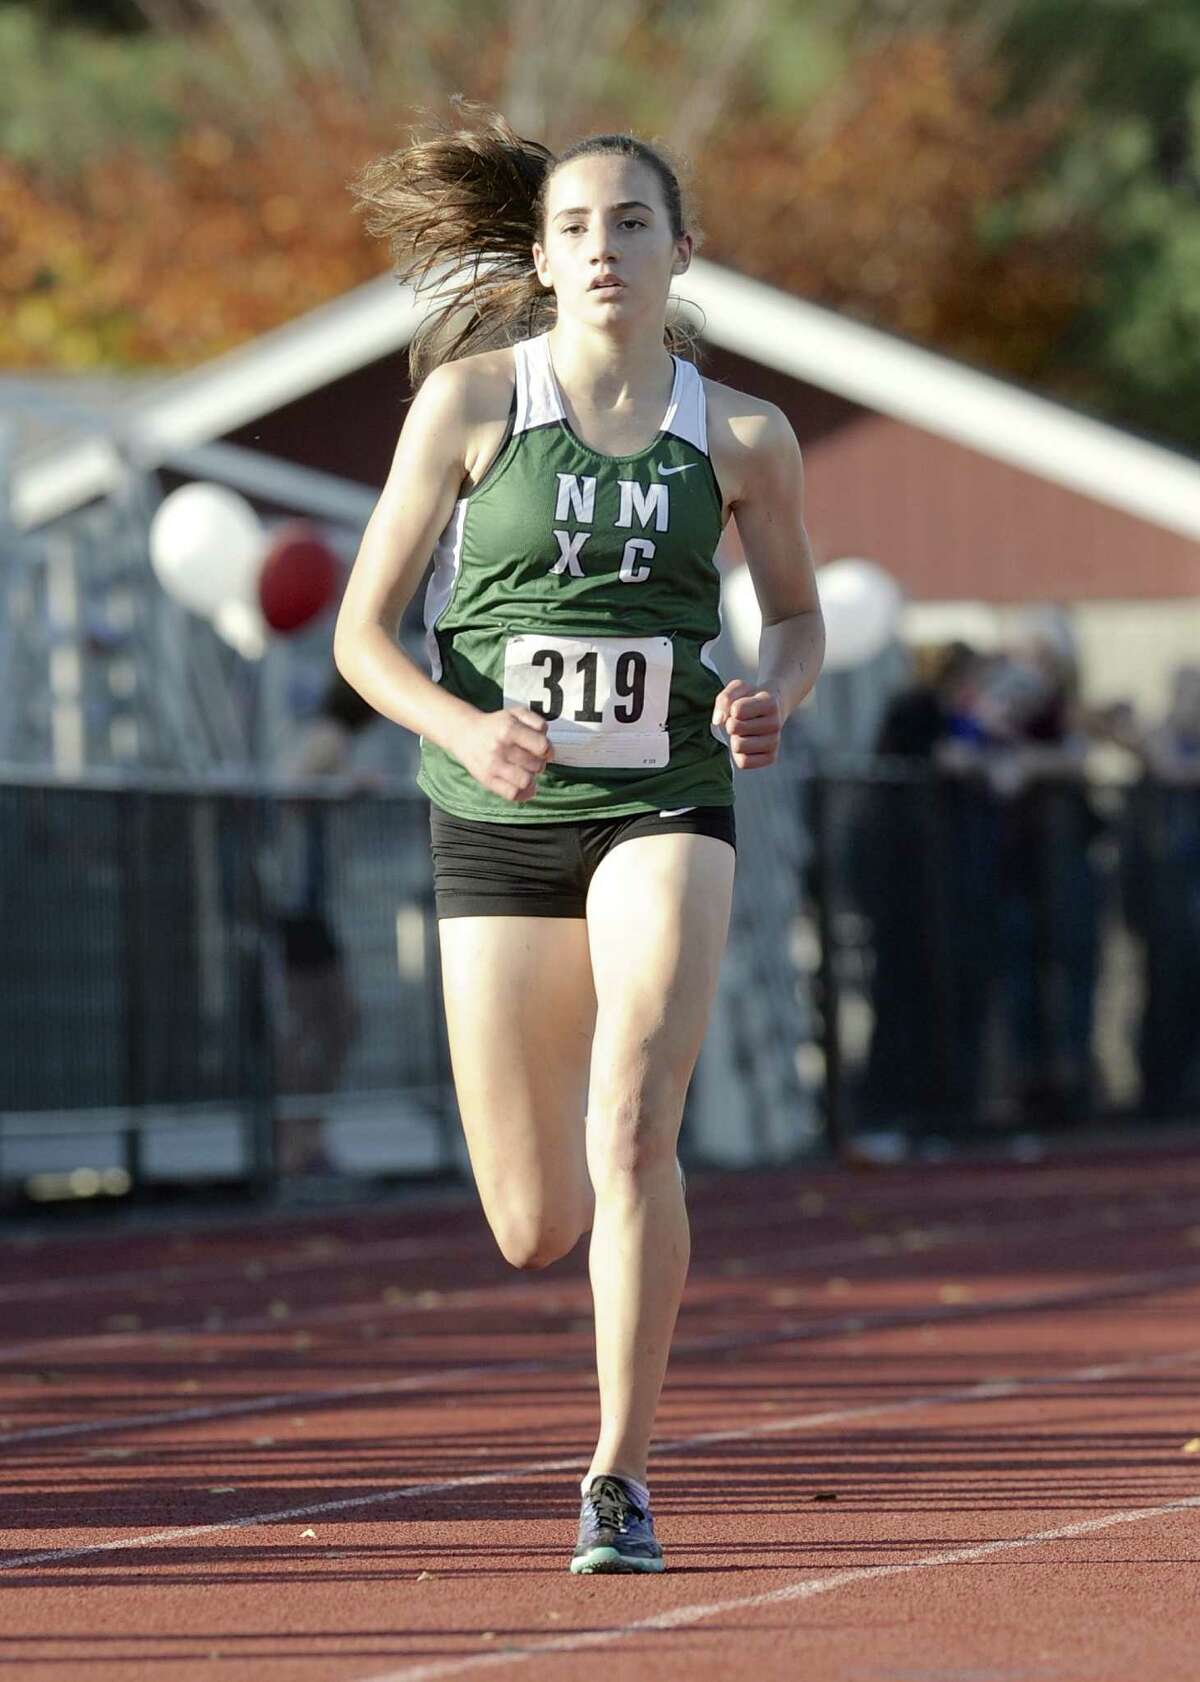 Mia Nahom (319), New Milford High School, finished 2nd in the girls SWC Cross Country Championship, held at Bethel High School, Bethel, Conn, on Friday, October 17, 2014.